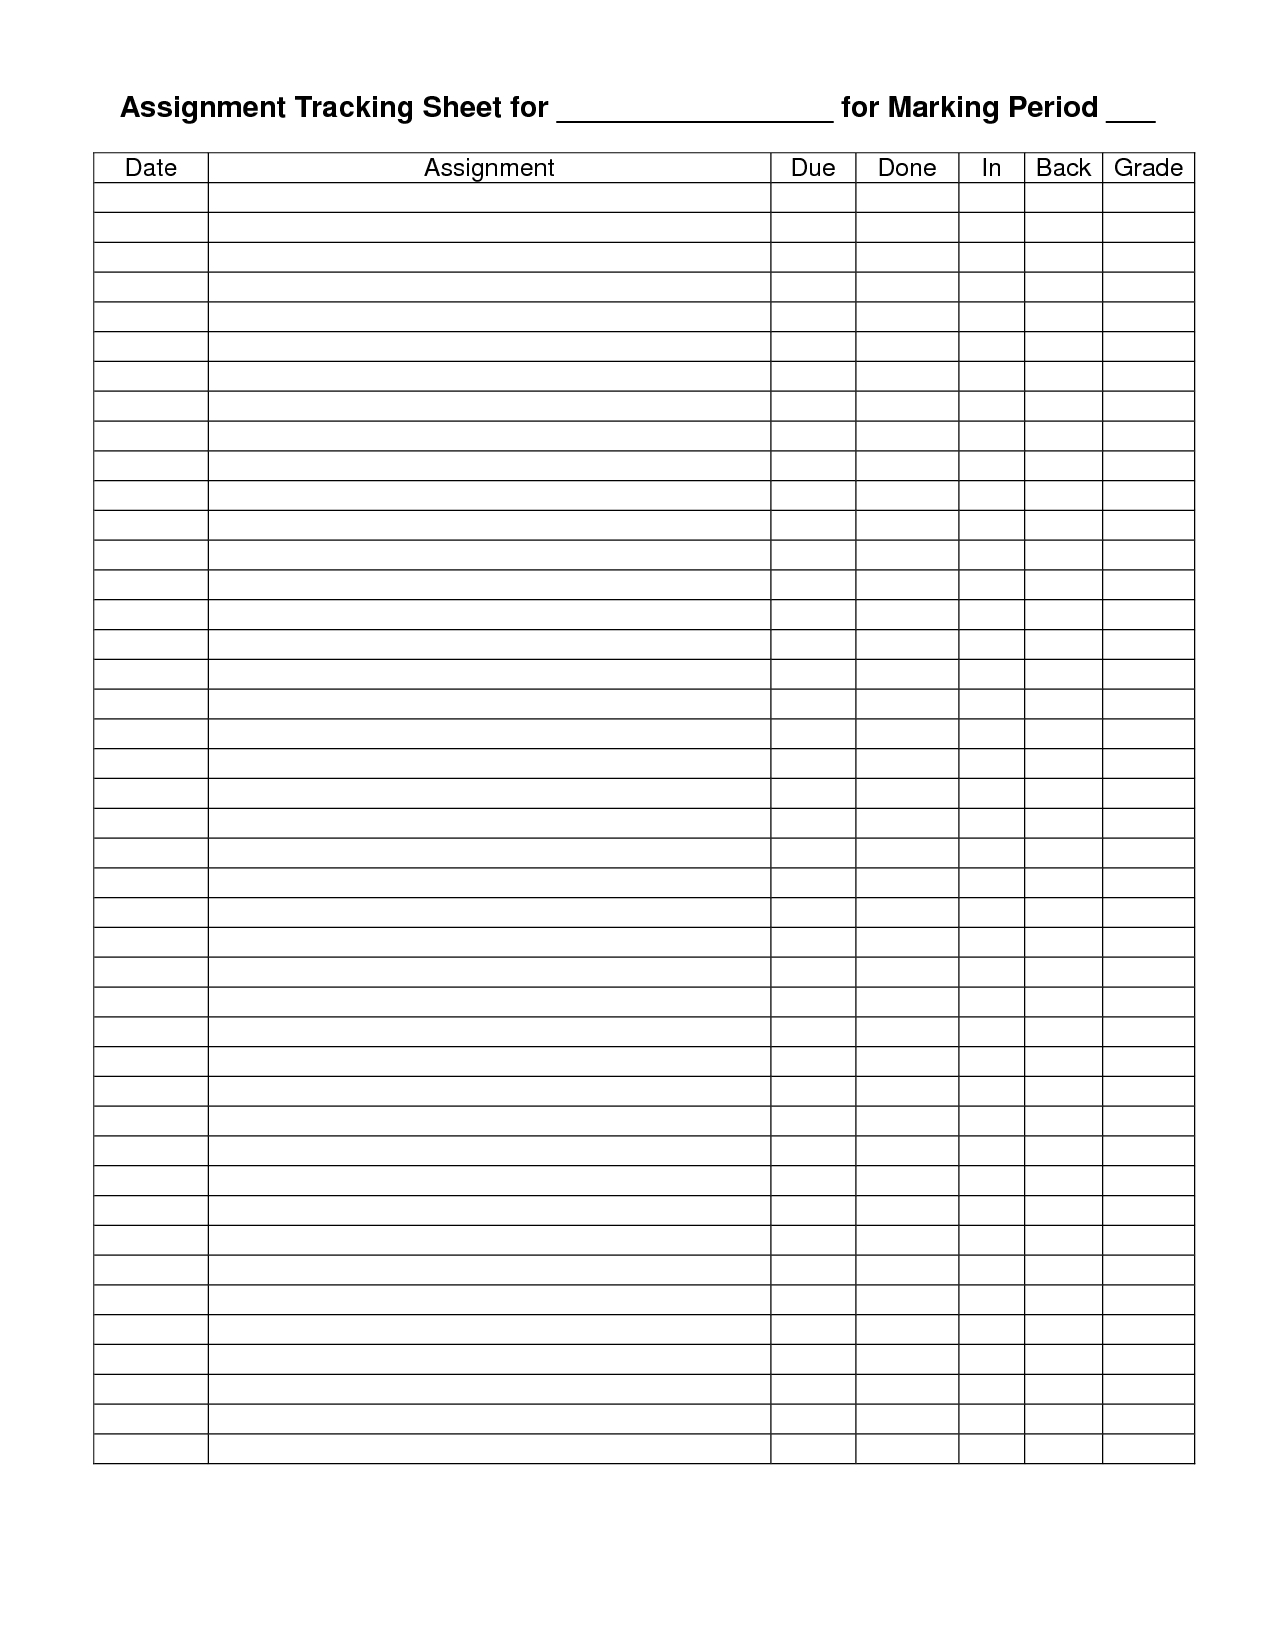 Assignment Tracker Printable - Google Search | School